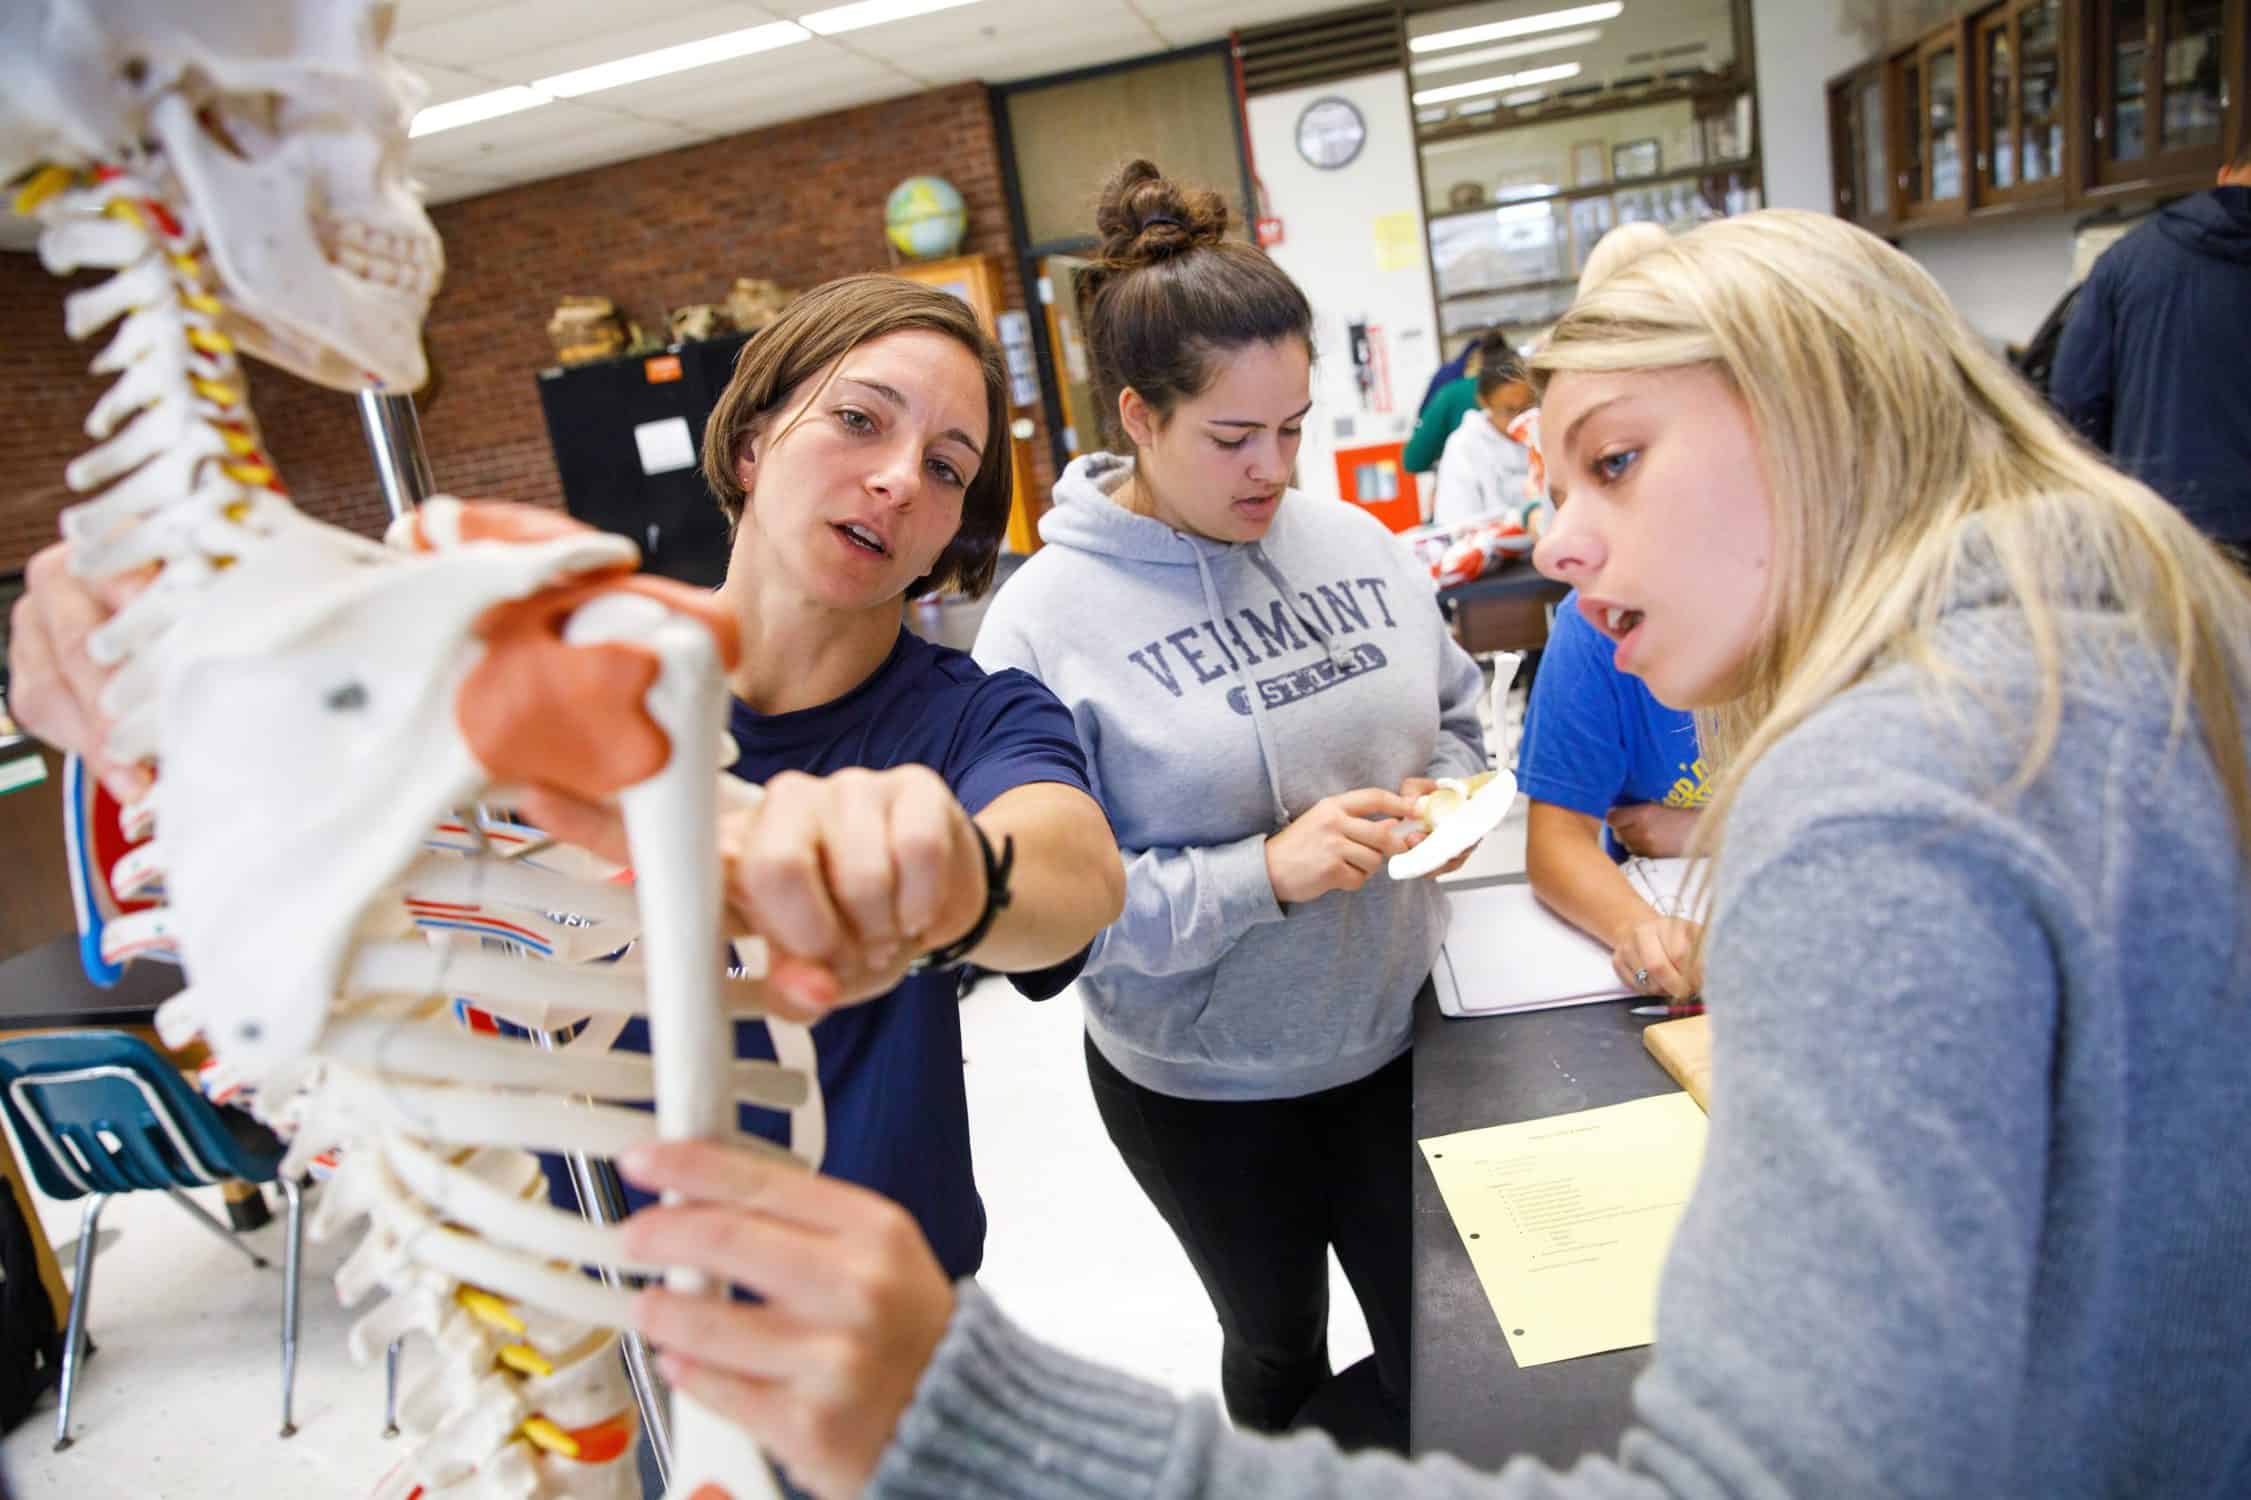 Students learn by examining a medical skeleton with their professor